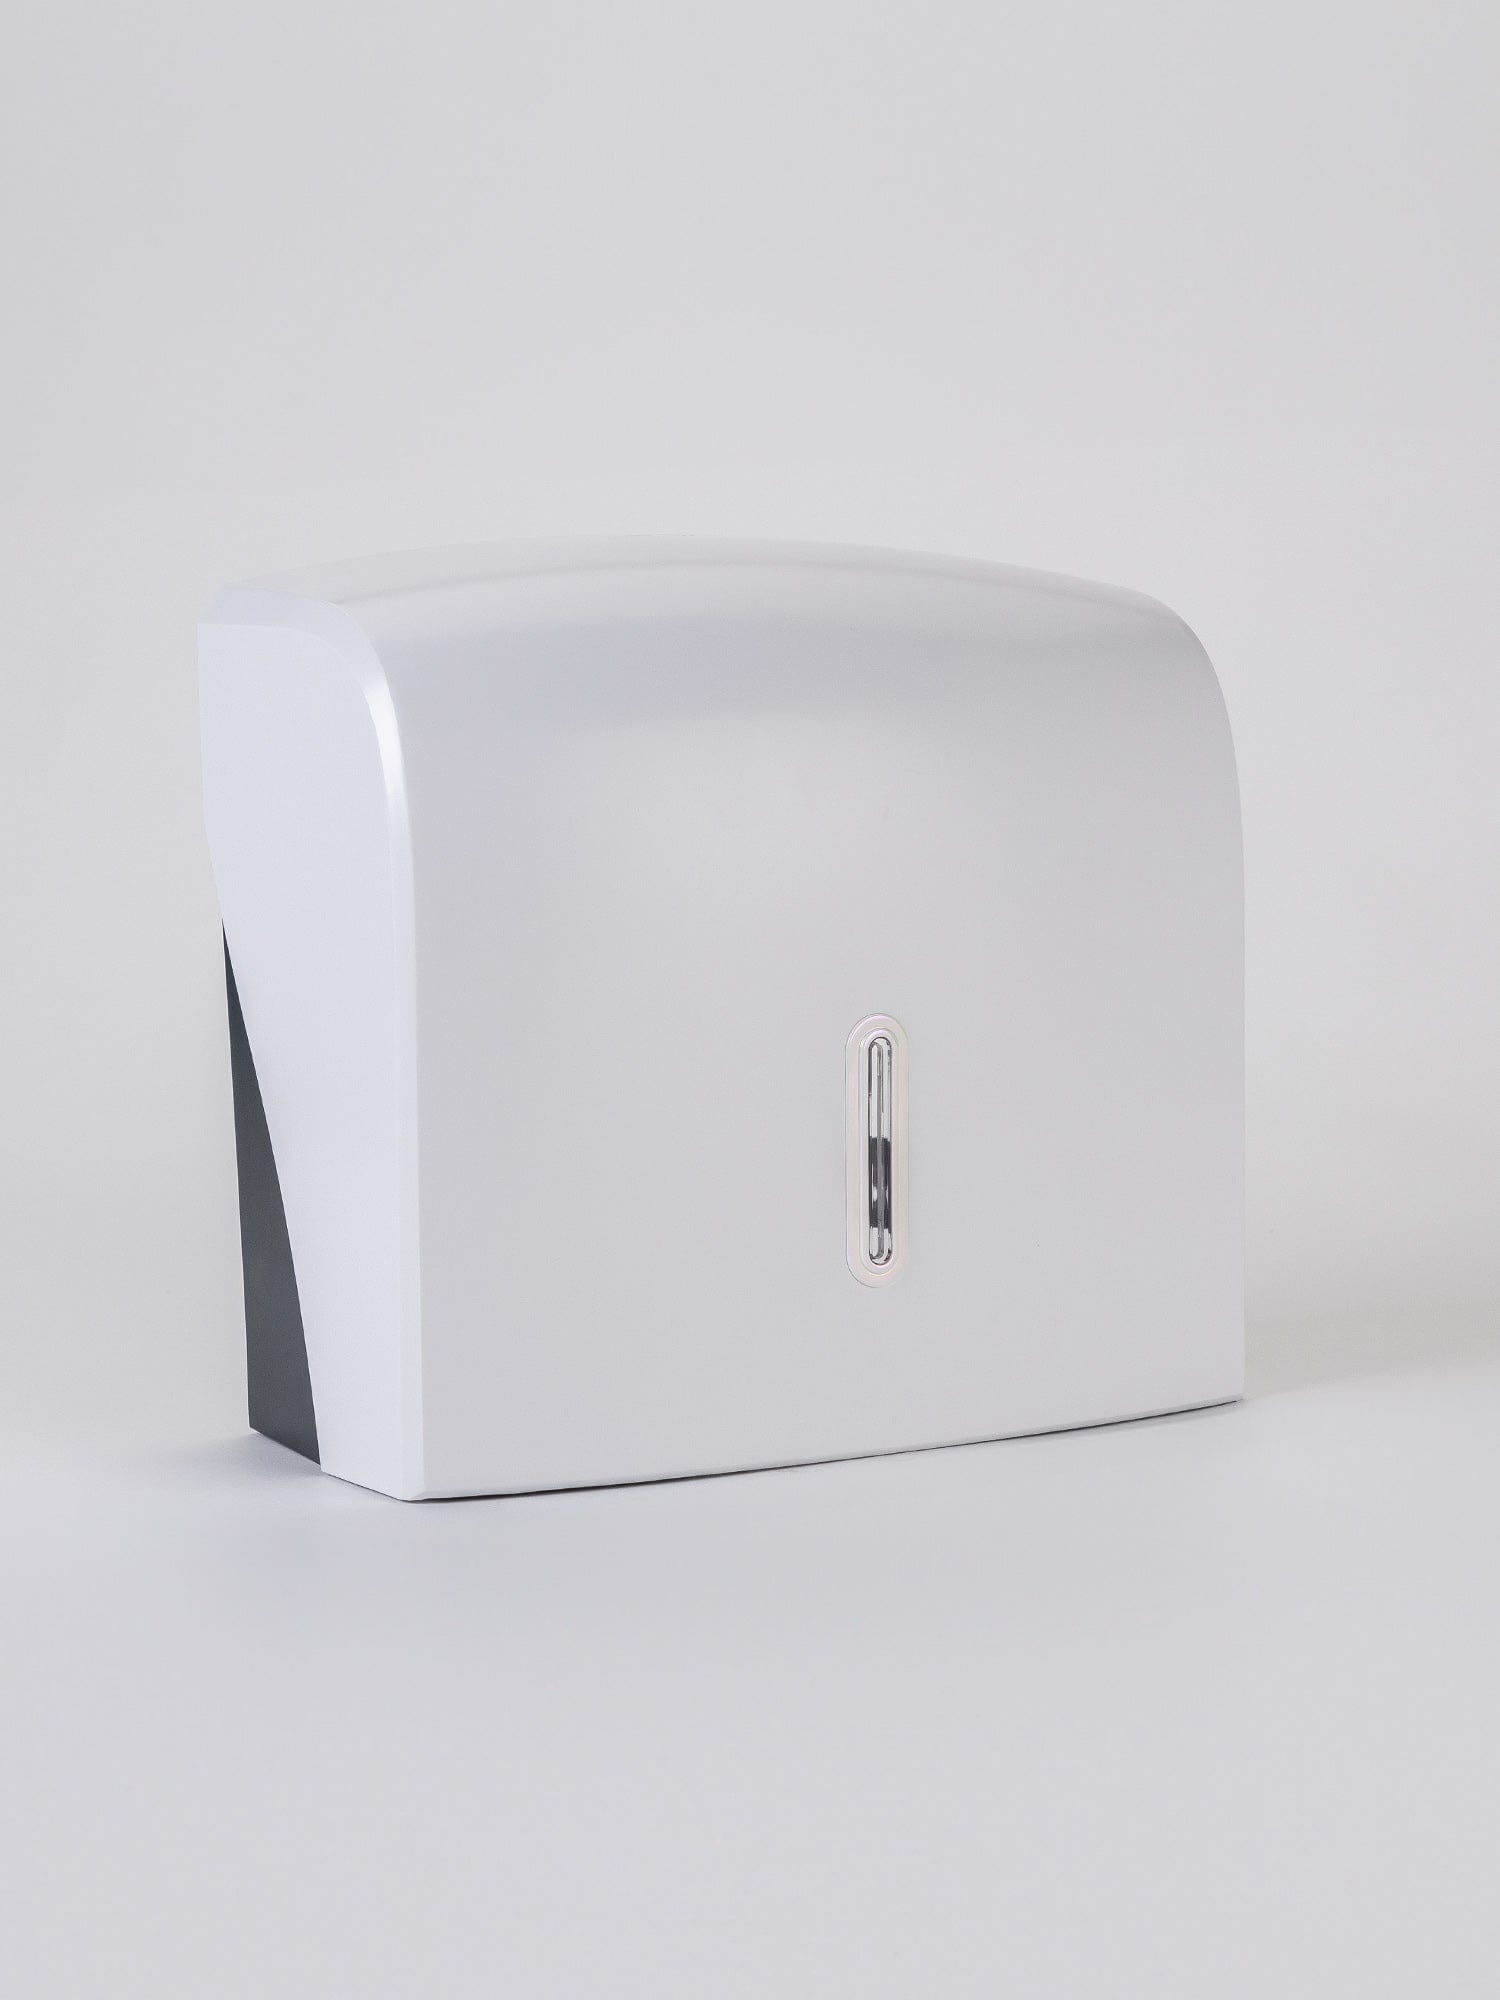 pearl halo small hand towel dispensers